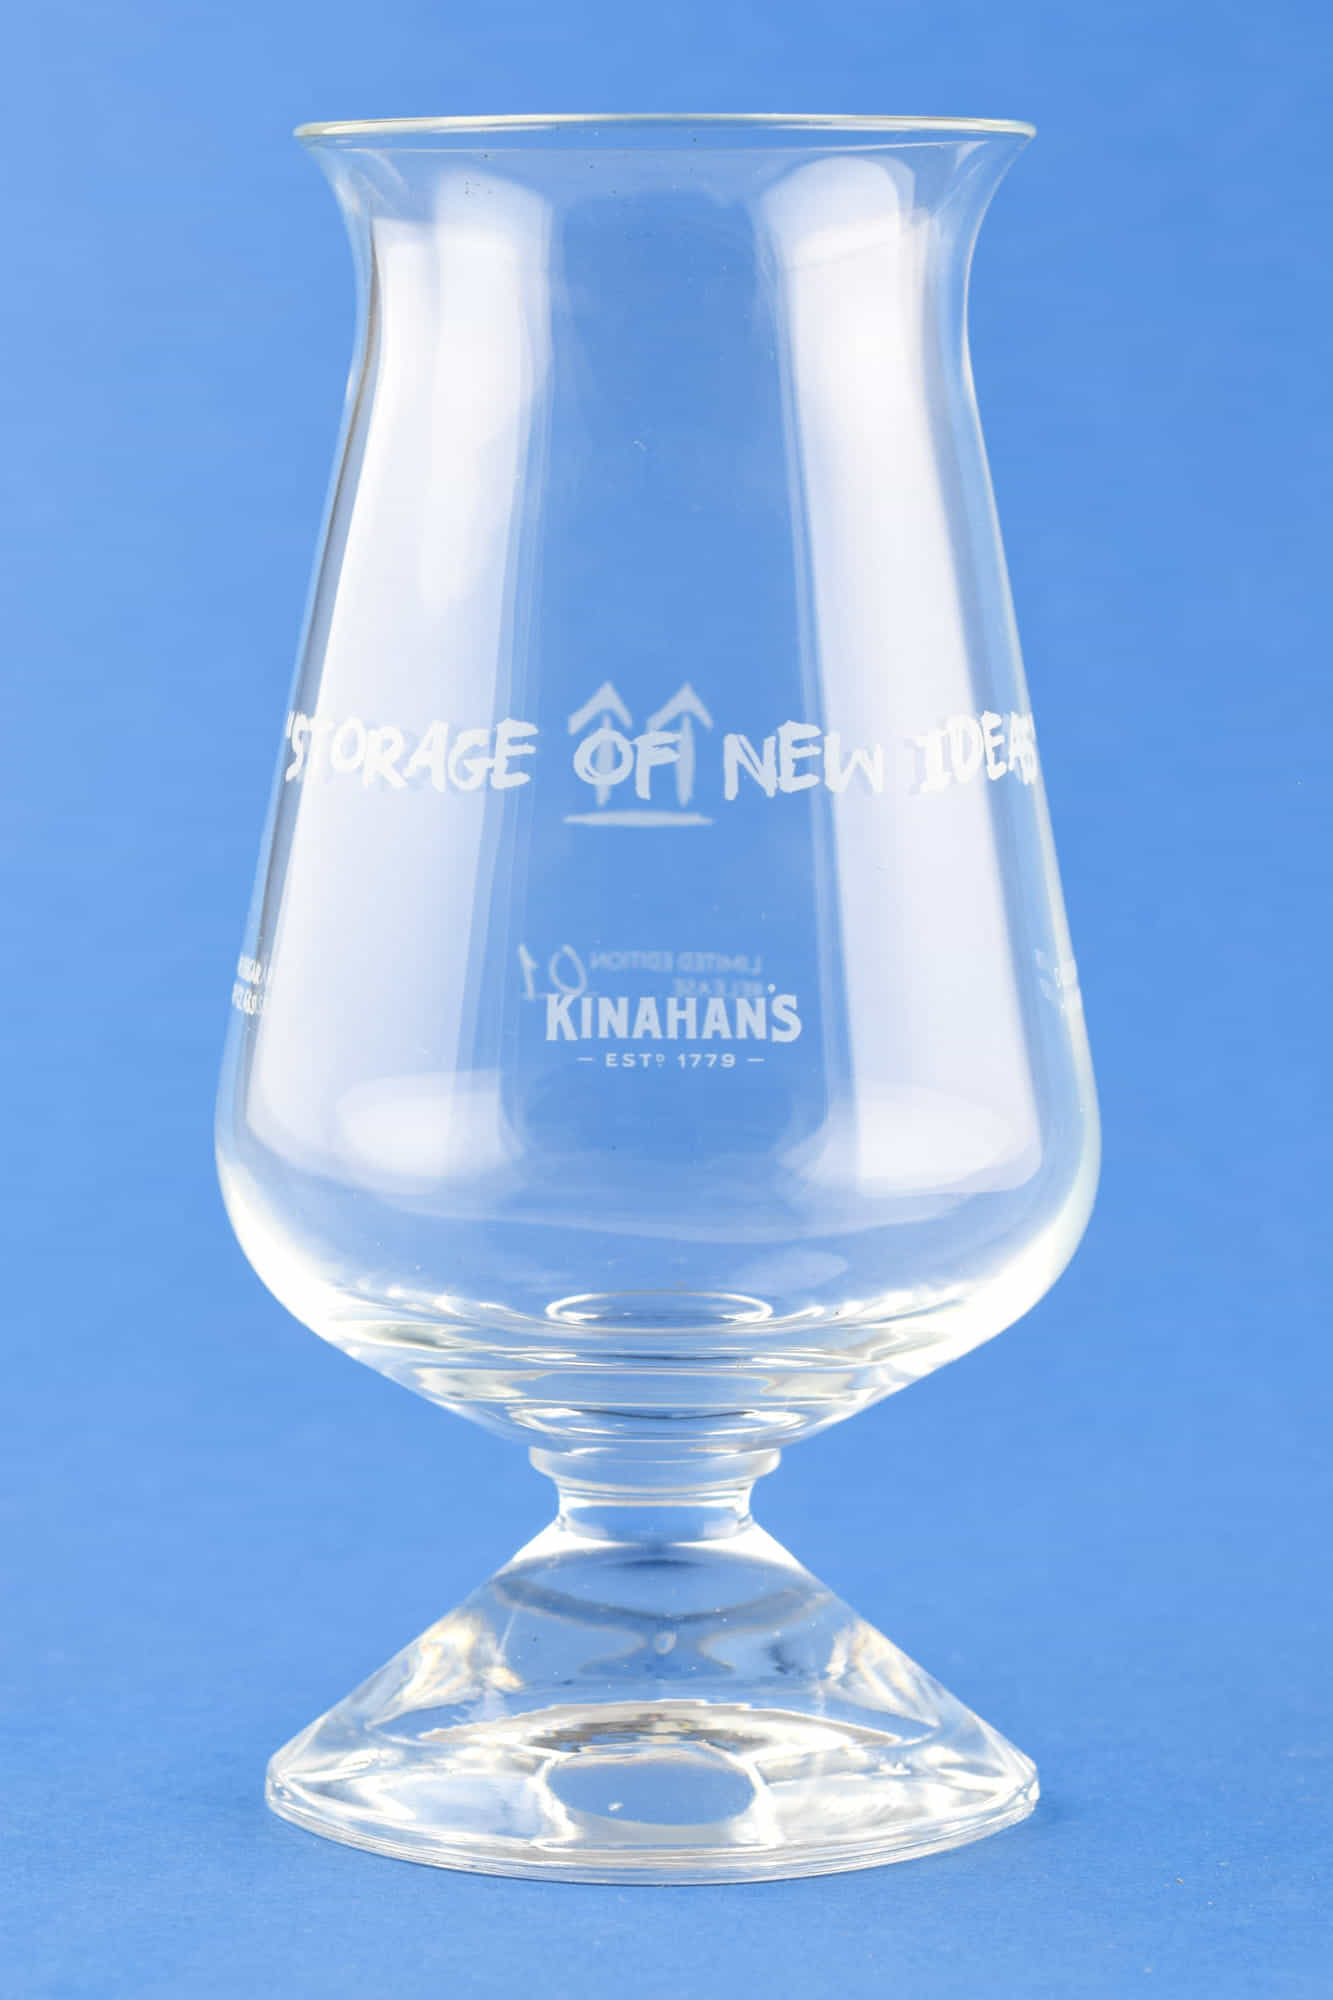 now! Home of explore Malts & Kinahan\'s at | The Home Malts >> of 45%vol. Gläser M zwei 0,7l Kasc